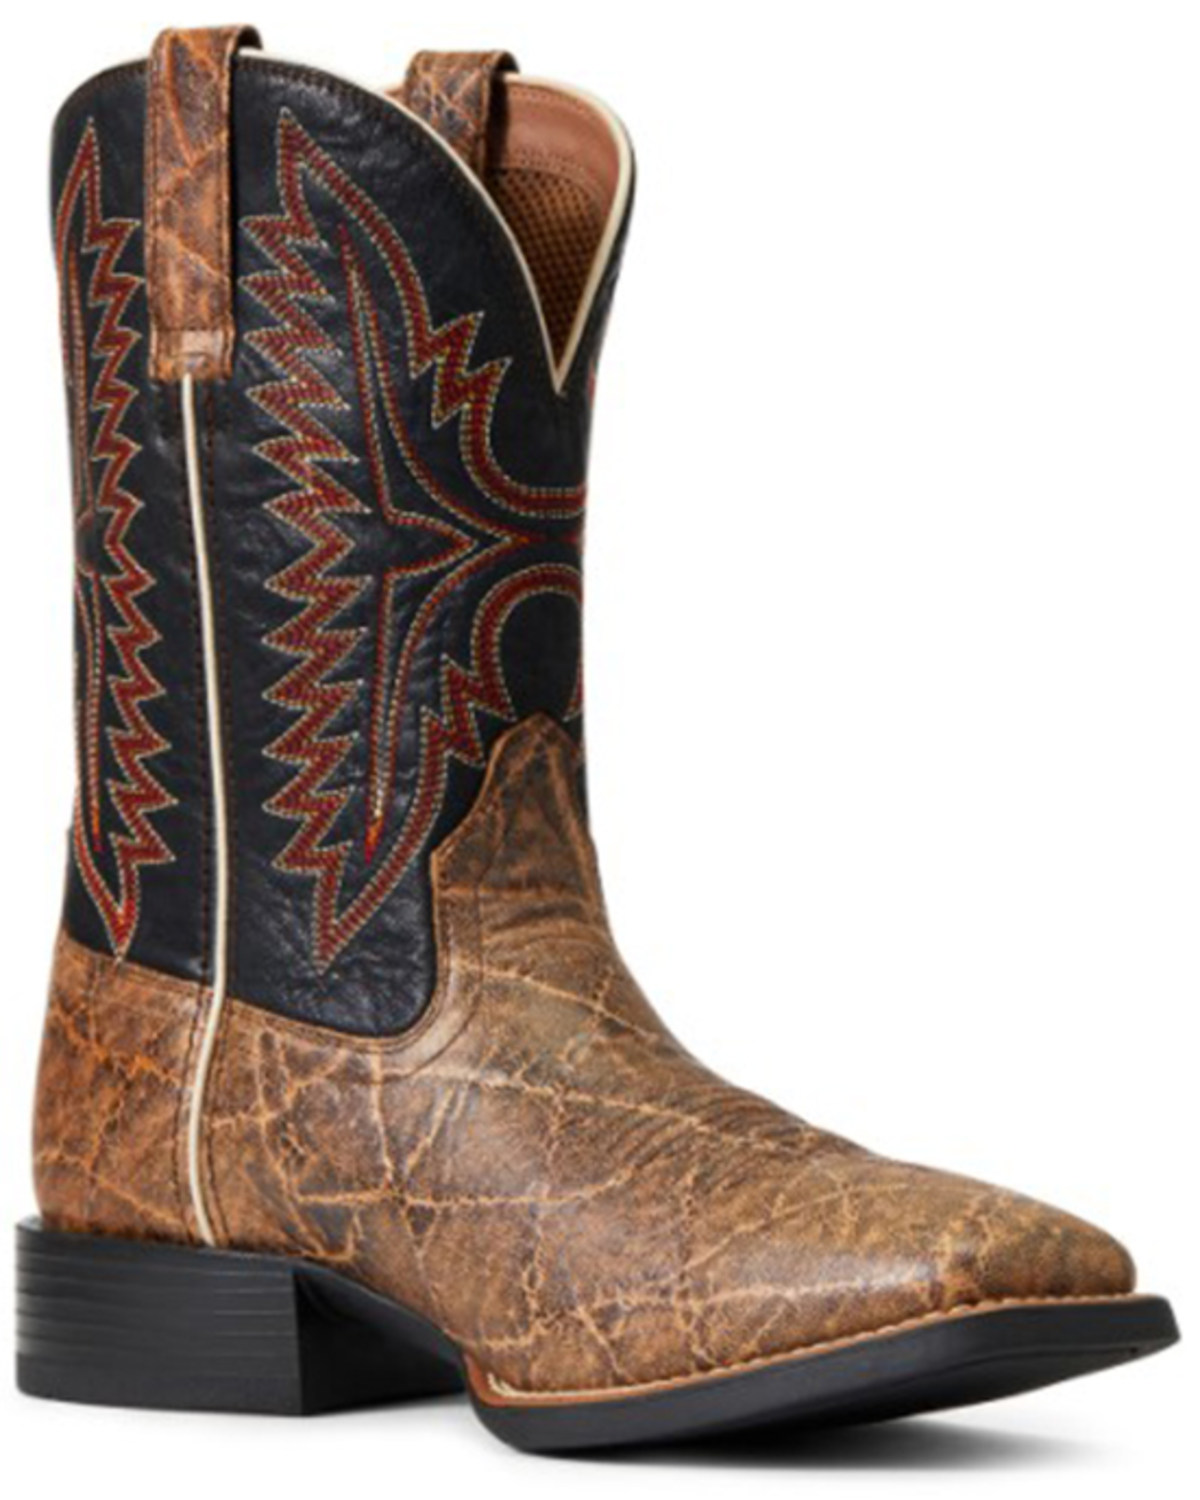 Ariat Men's Grizzly Elephant Print Sport Smokewagon Performance Western Boot - Broad Square Toe